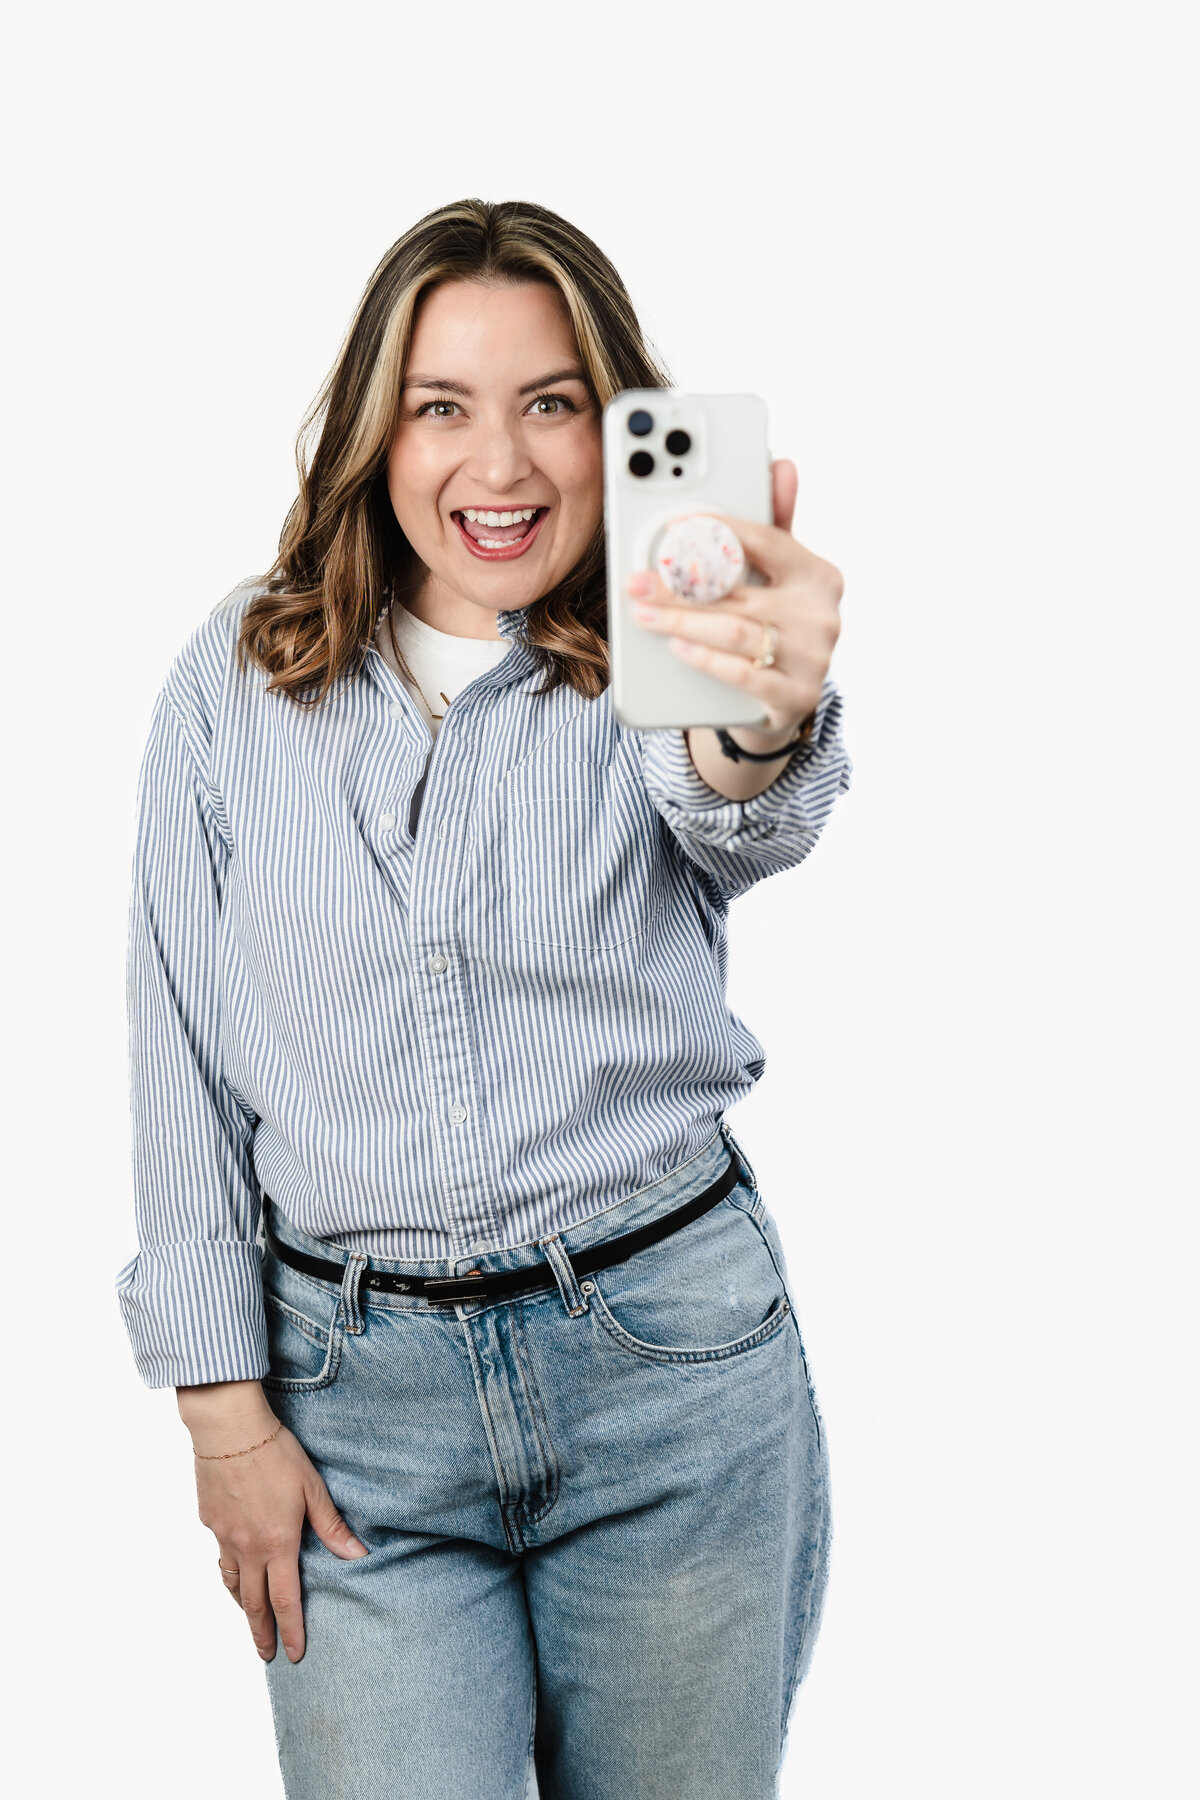 Marketing Strategist poses with her phone